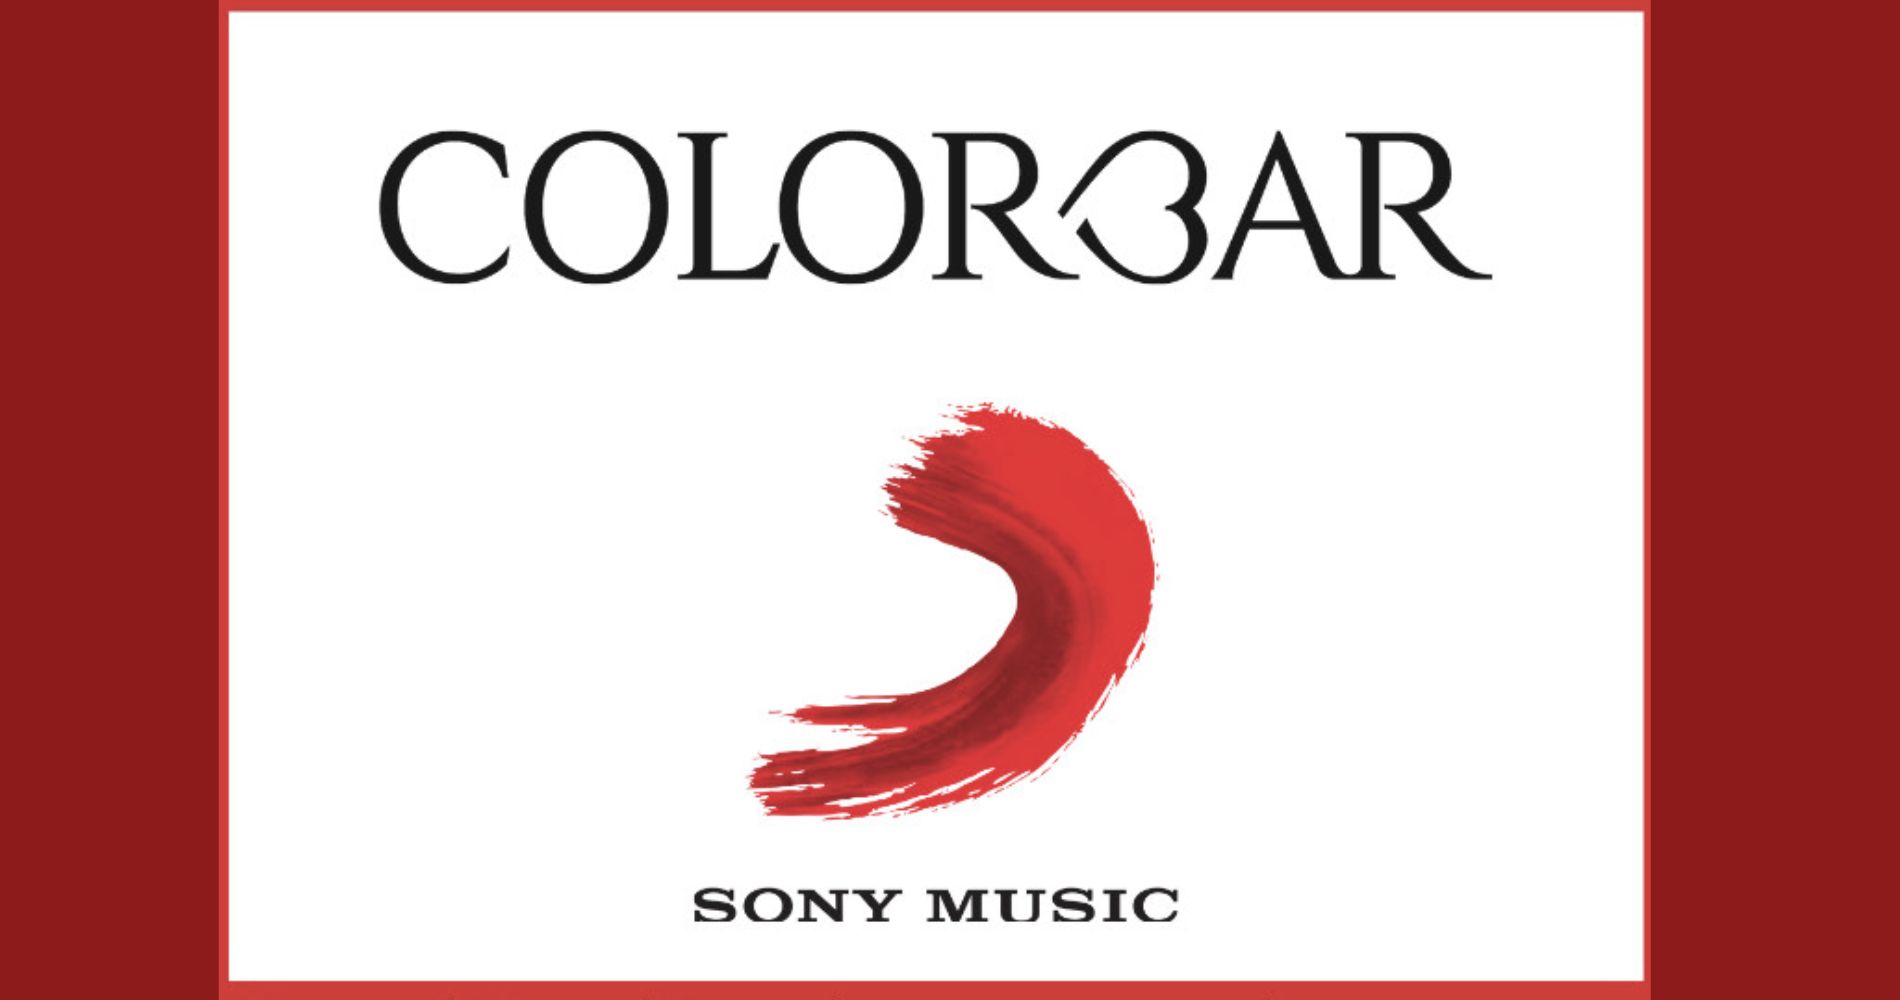 Colorbar launches #ColorbarXShringaar campaign in collaboration with Sony Music